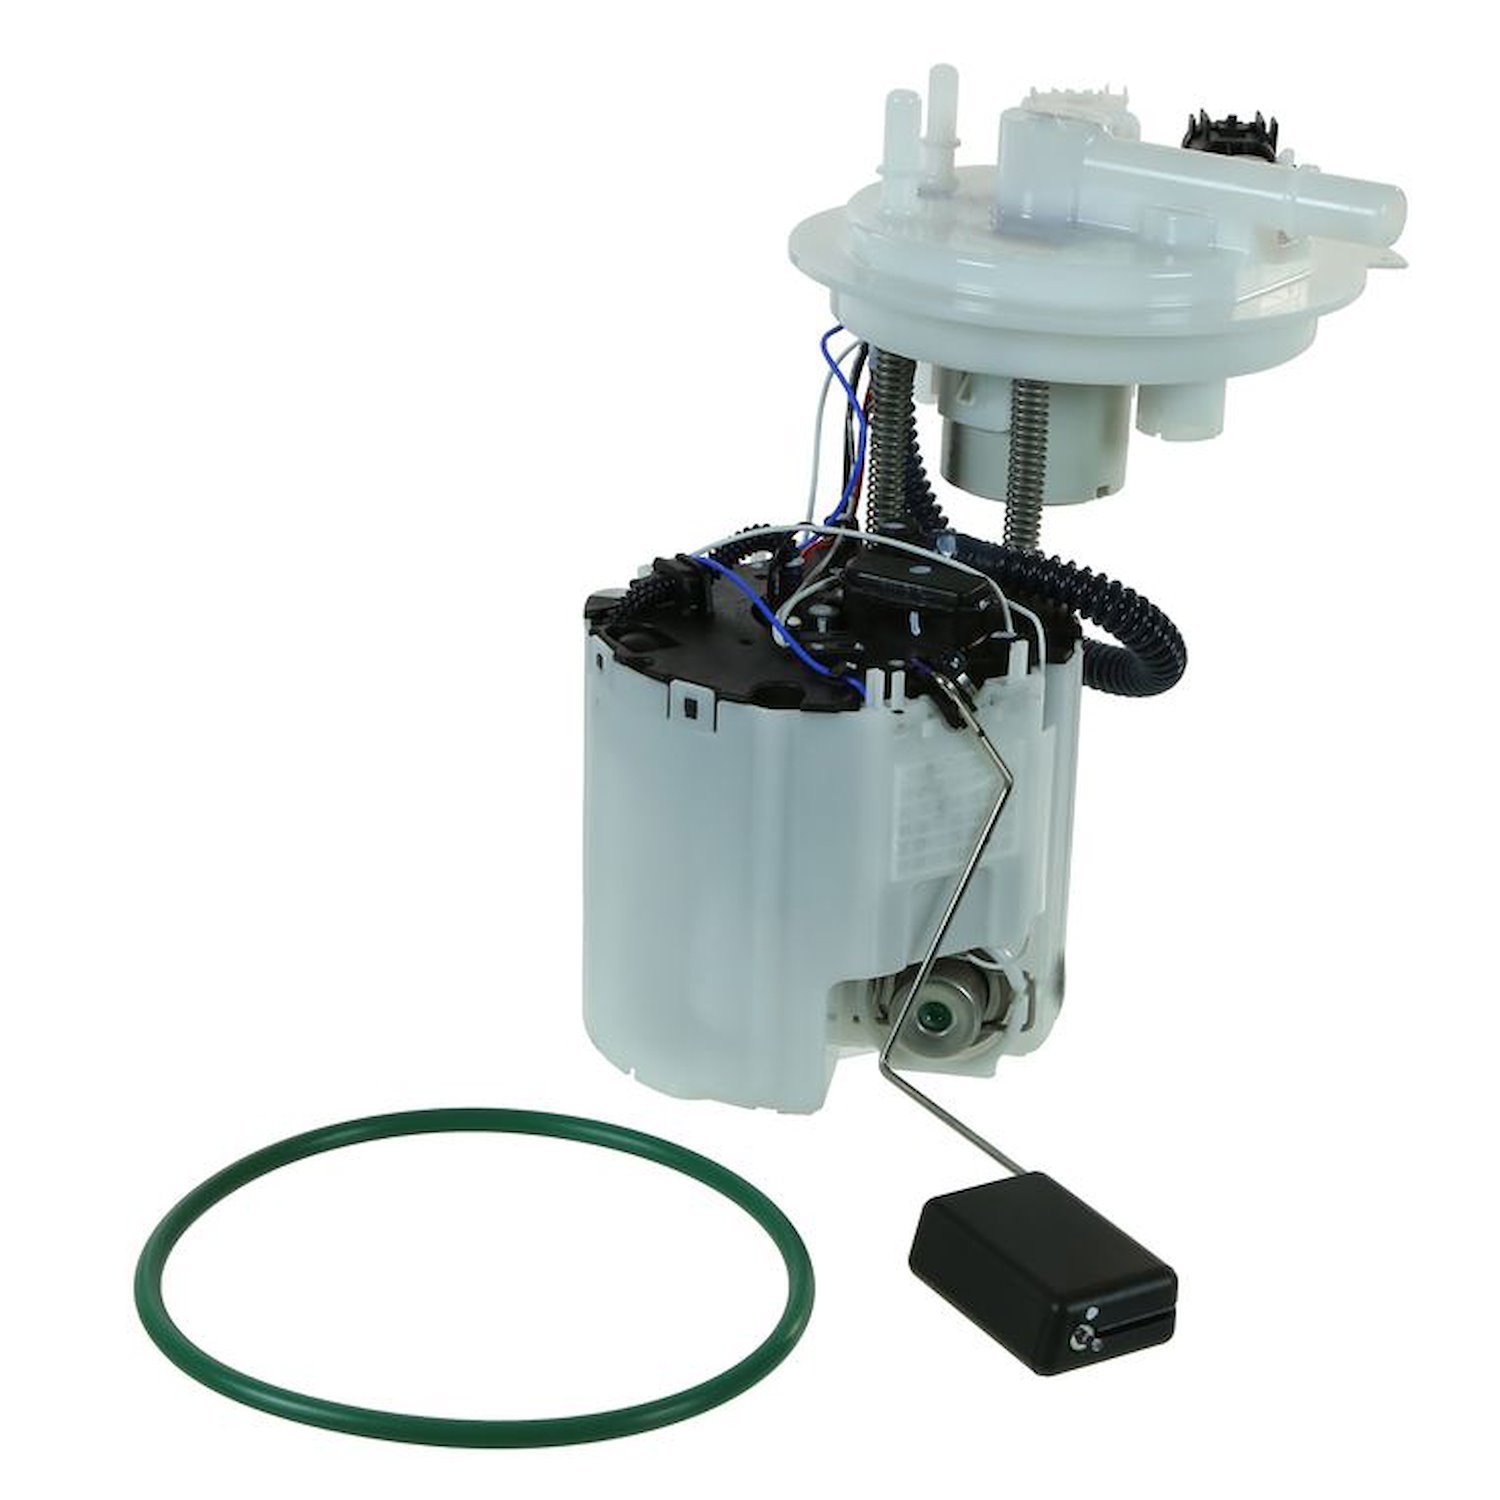 OE GM Replacement Electric Fuel Pump Module Assembly for 2009-2010 Pontiac G6/2009-2012 Chevy Malibu